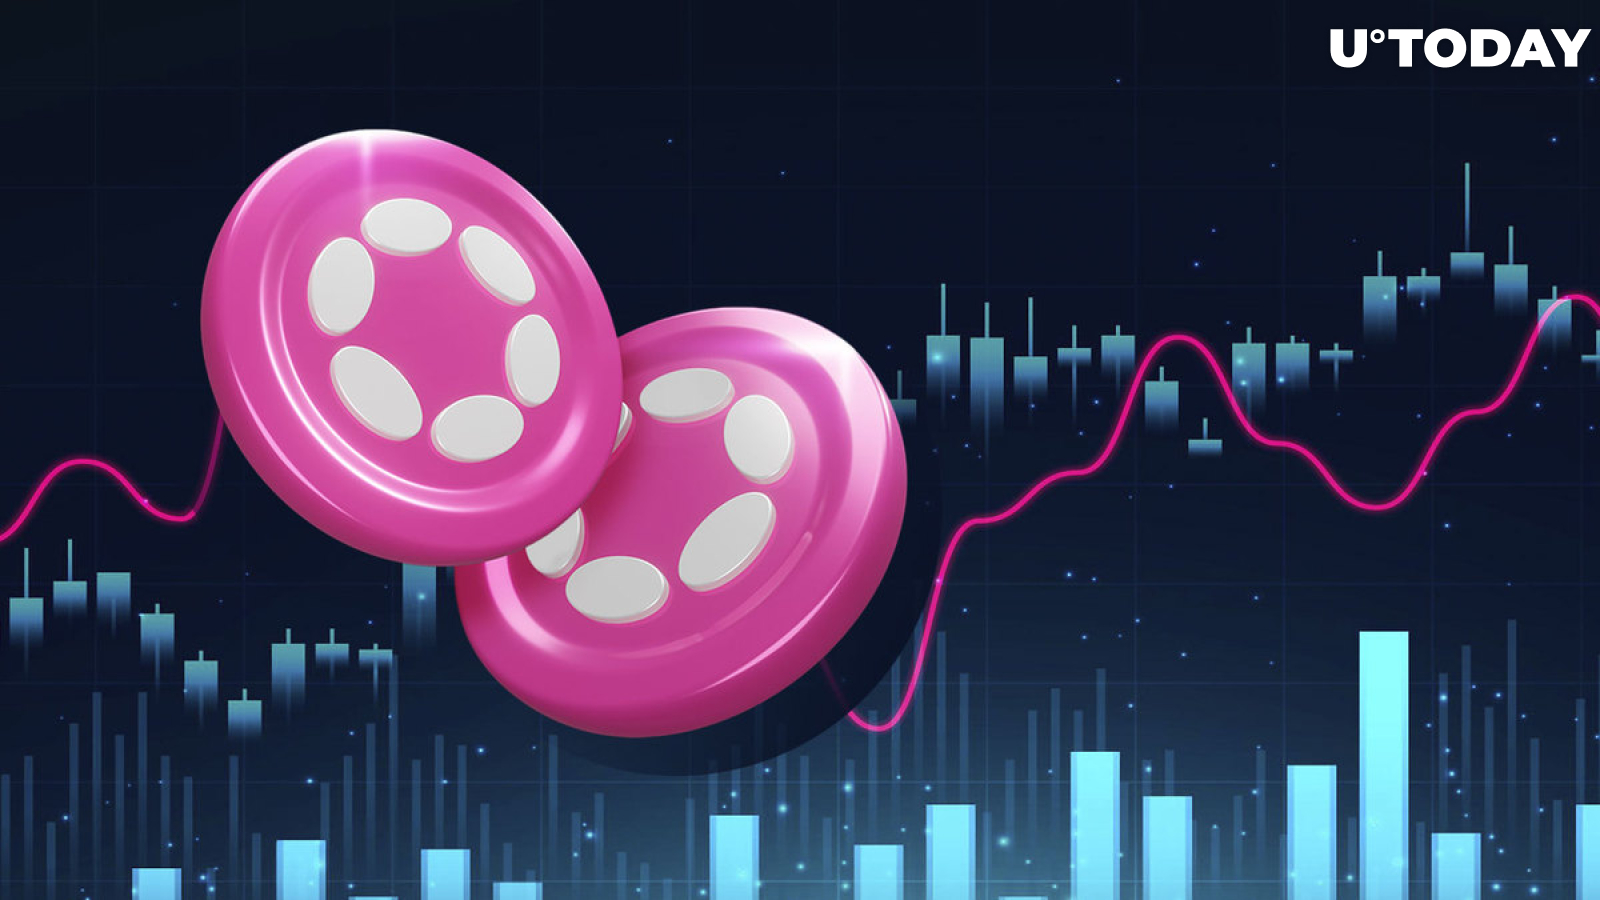 Polkadot (DOT) Launches Most Important Upgrade, Price Reacts